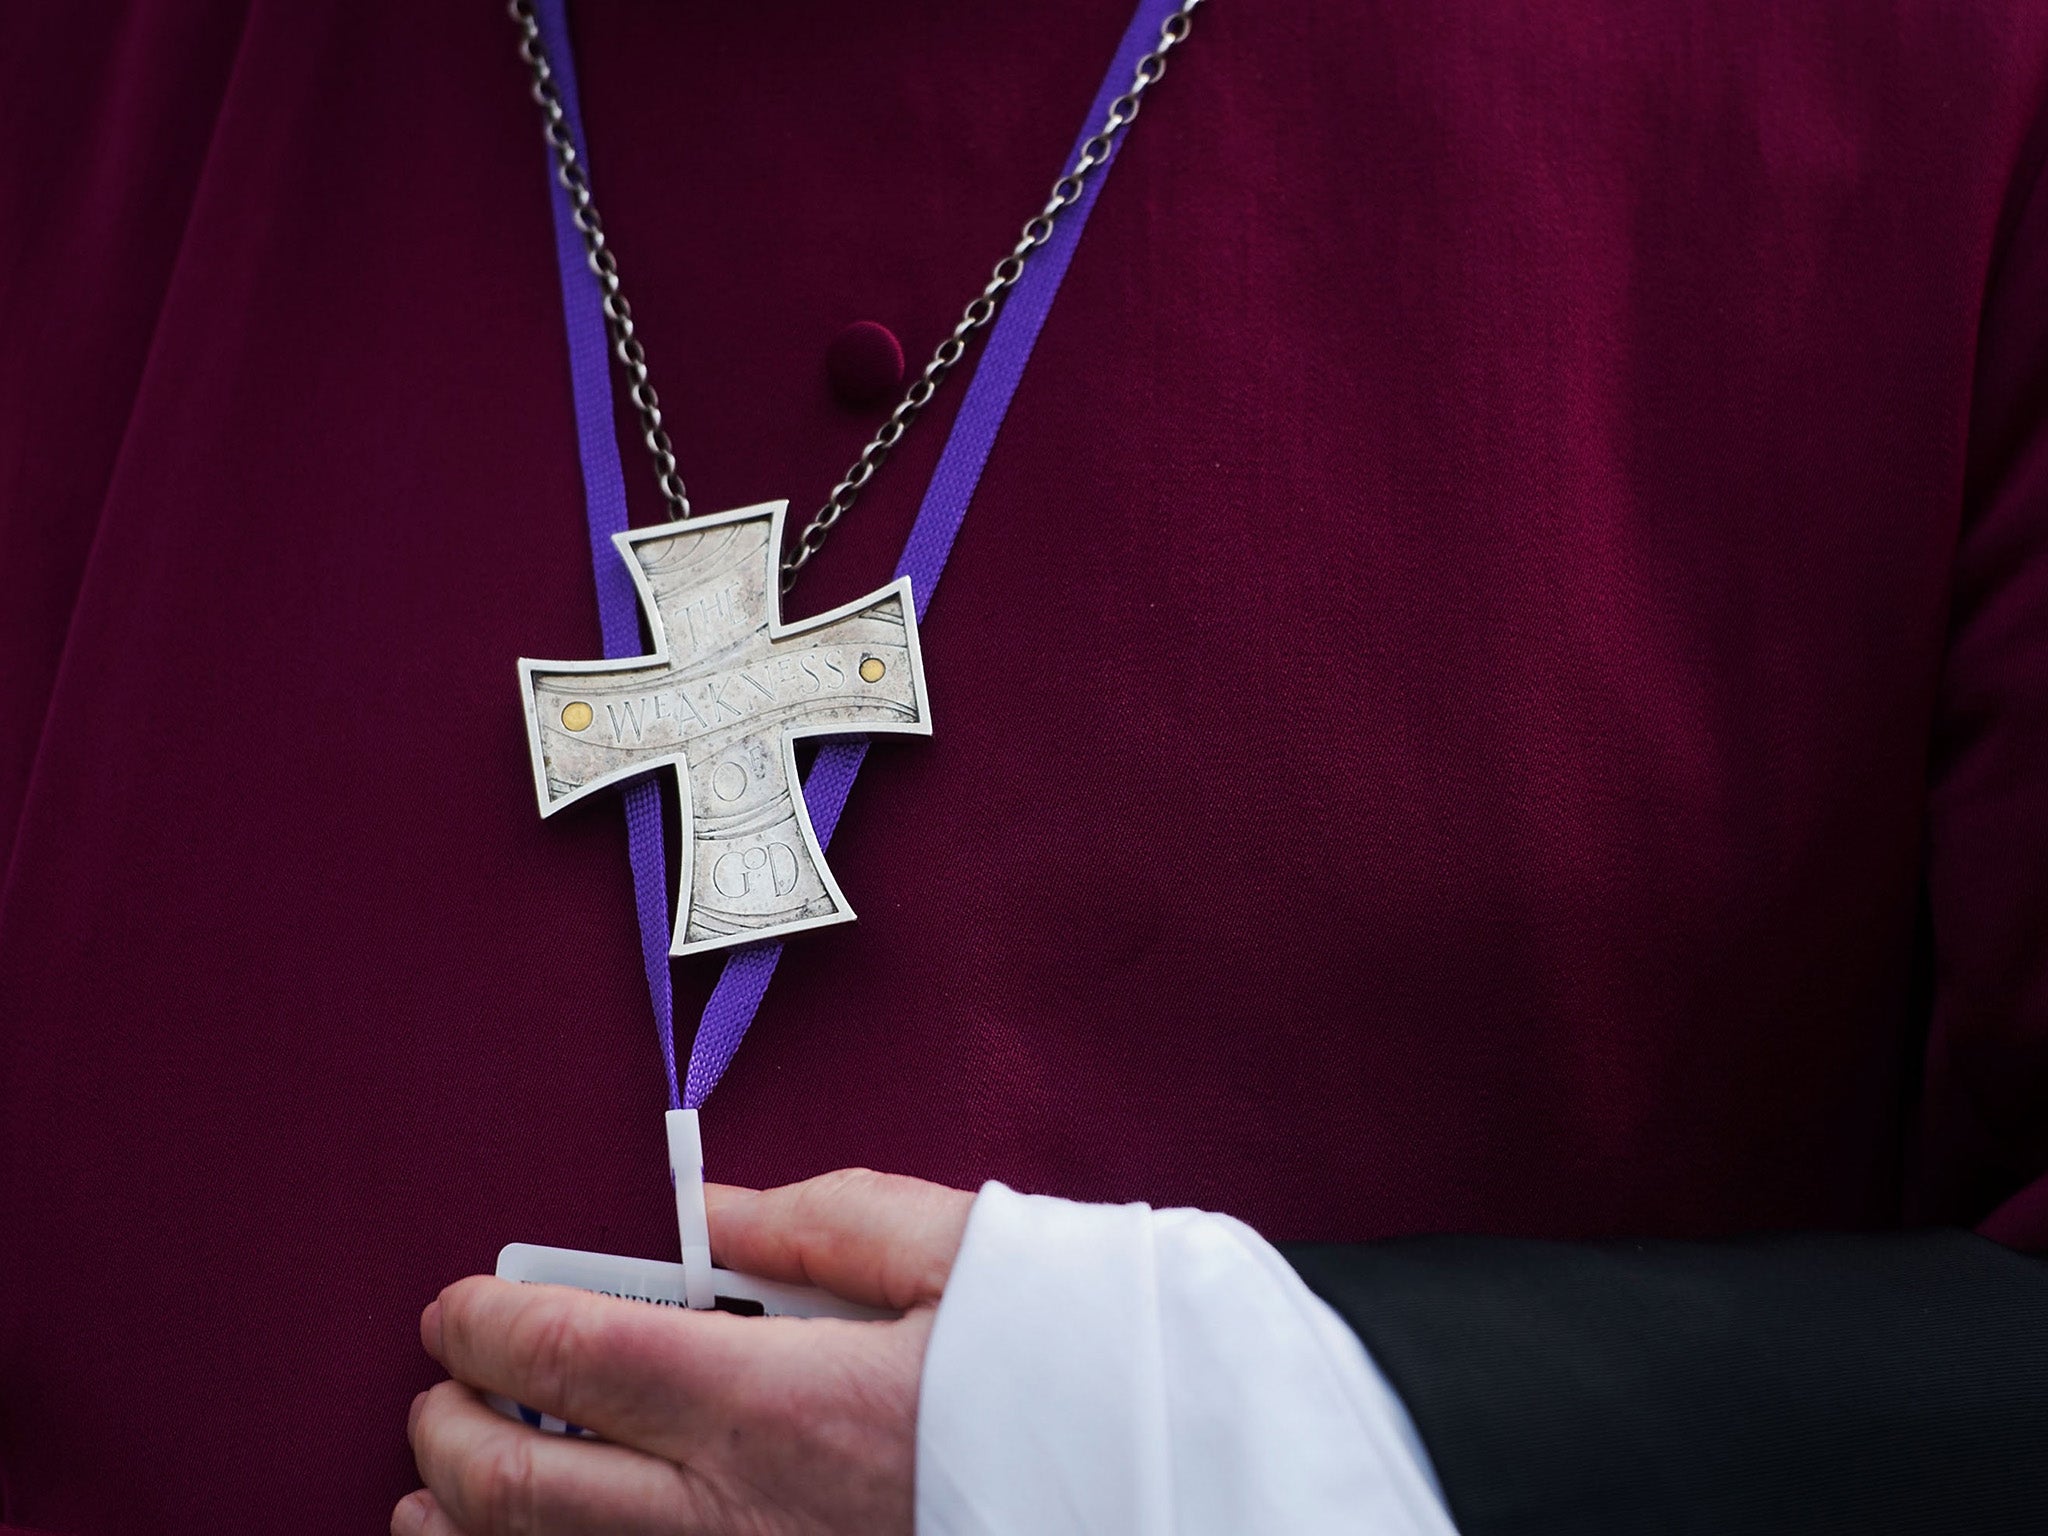 Church of England leaders failed to acknowledge the 'sadistic' abuse suffered by Survivor B for 40 years